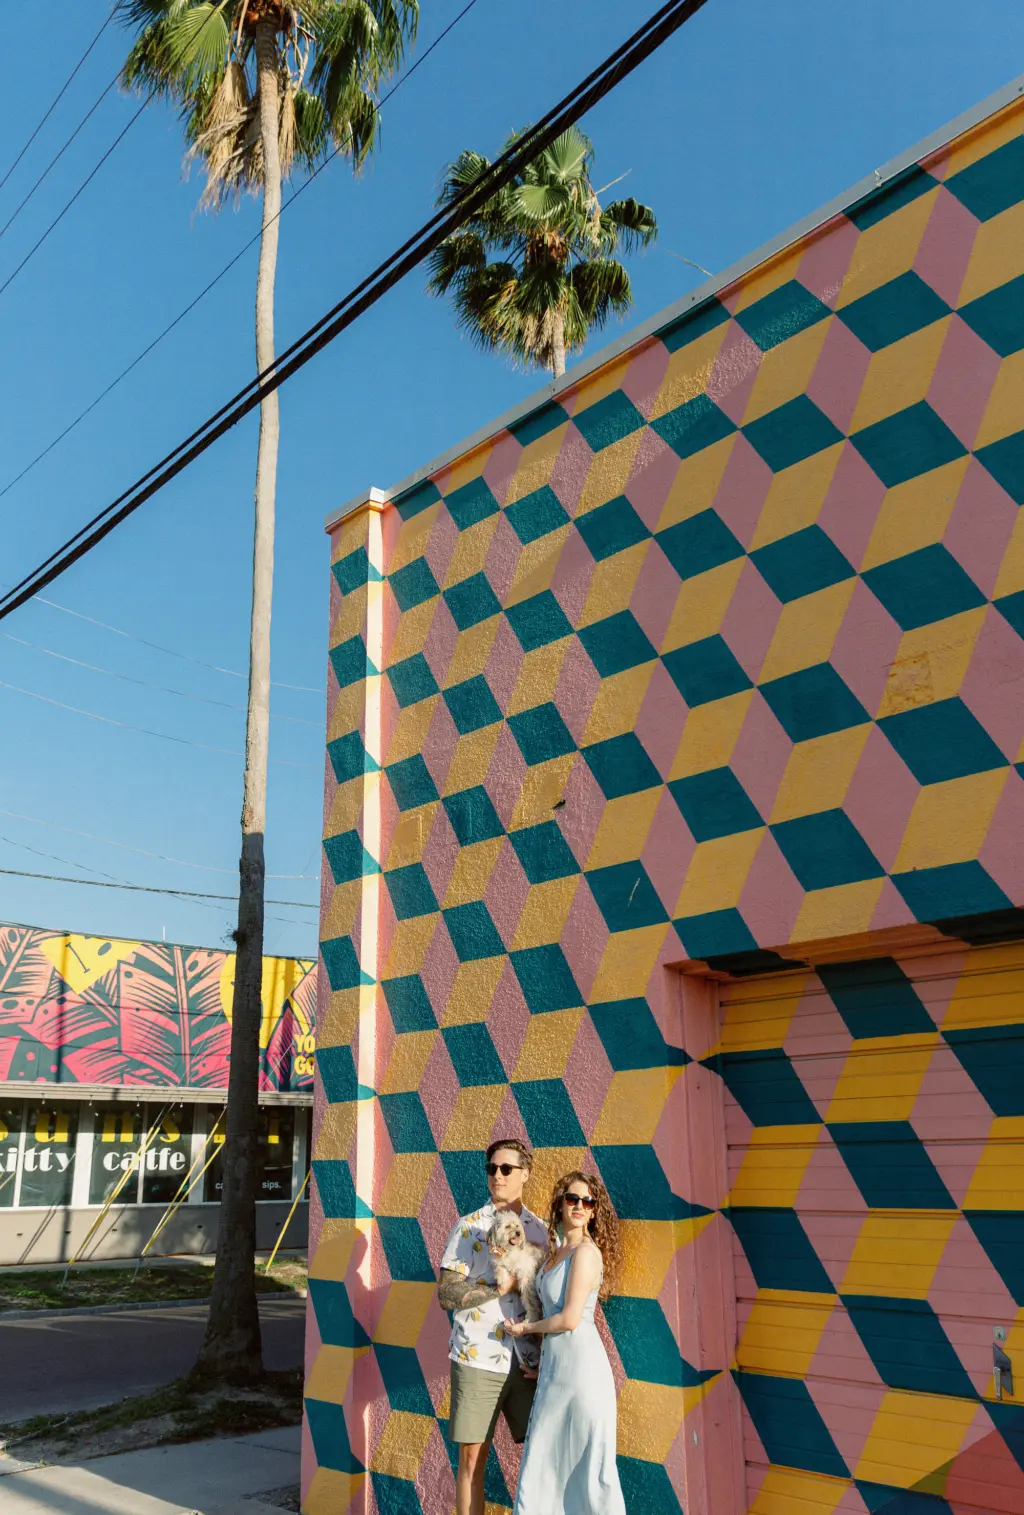 St Pete Murals Engagement Session Location Ideas | Tampa Bay Wedding Dewitt for Love Photography